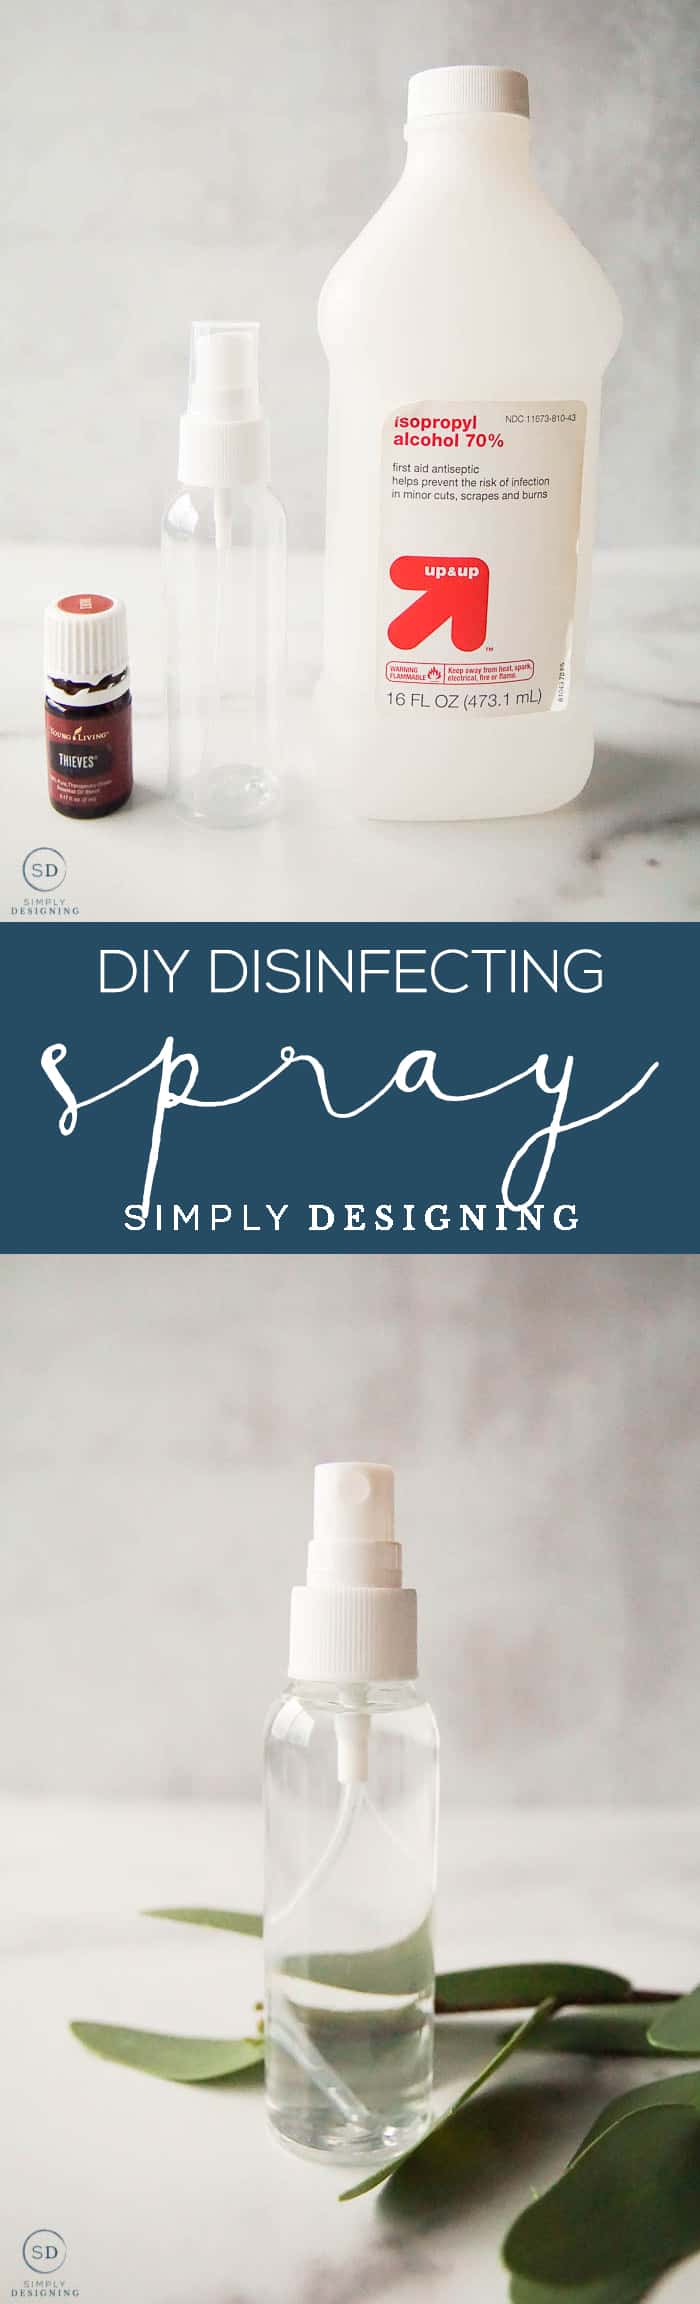 Learn how to make this DIY Disinfecting Spray so that you can easily disinfect doorknobs handles carts and so many other surfaces at home or on-the-go